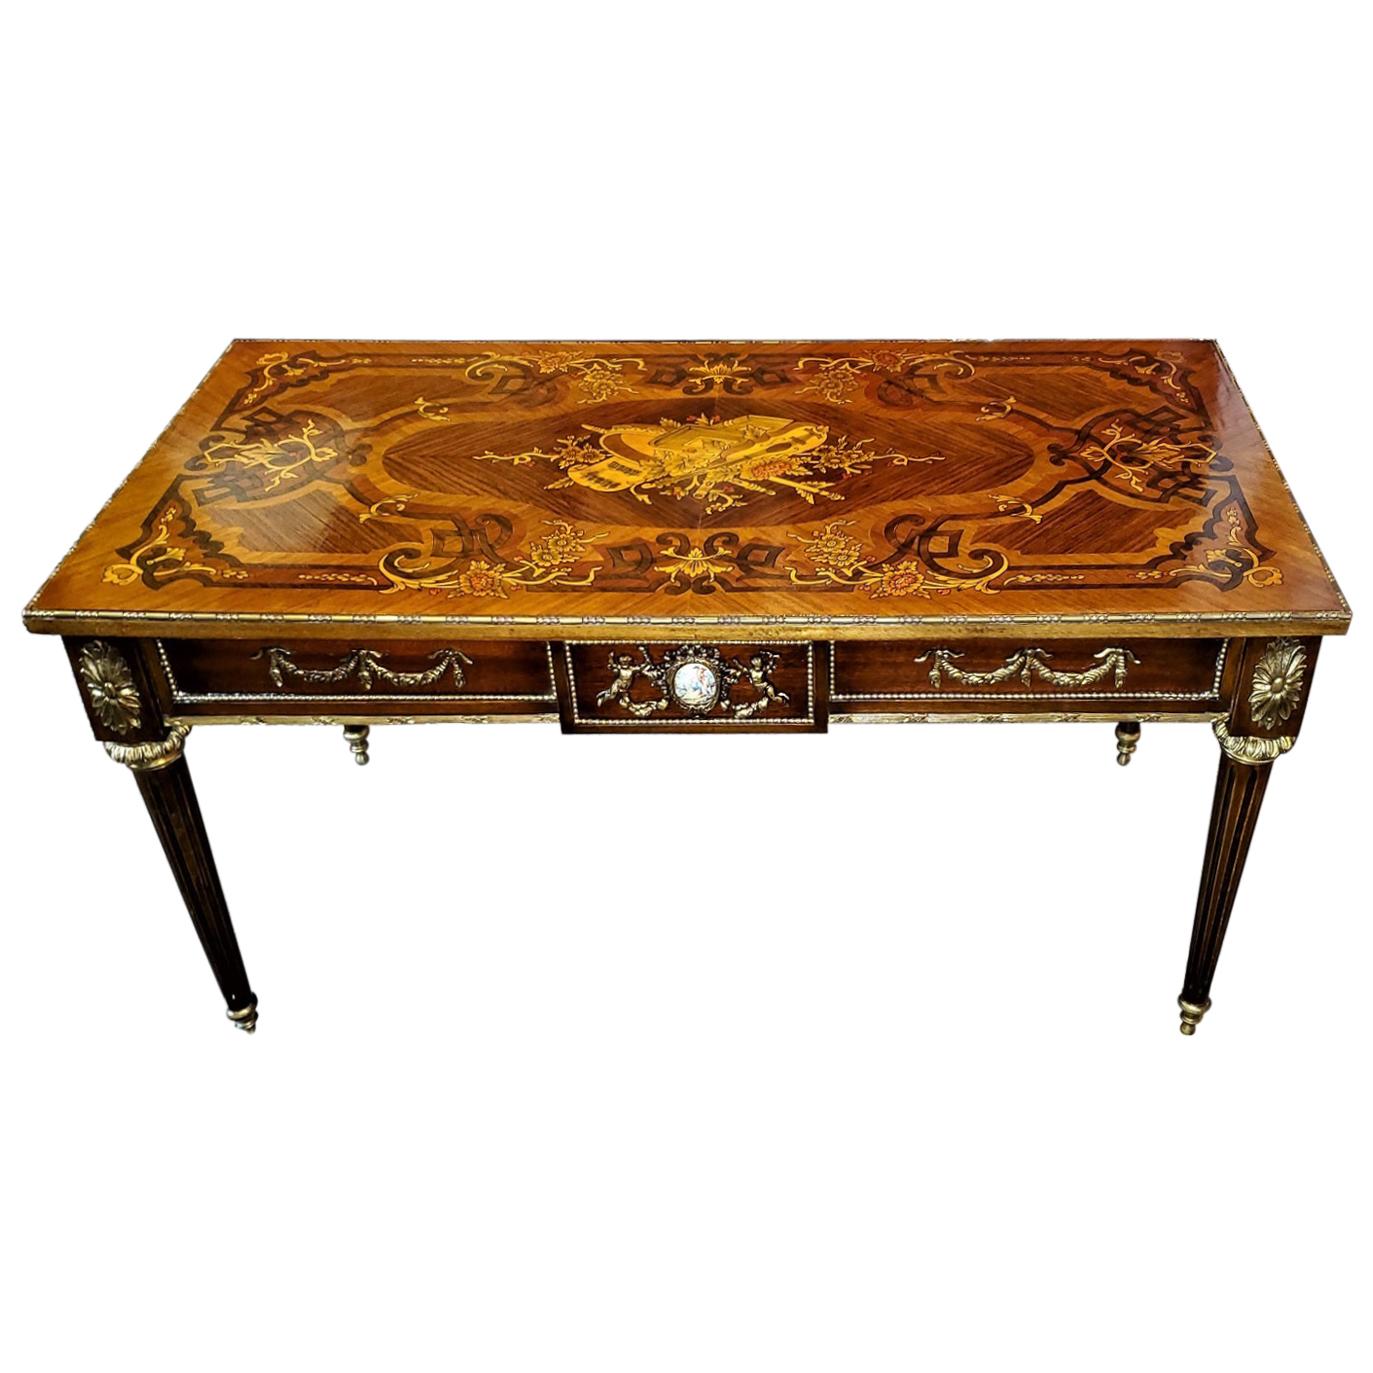 19th Century French Low Side Table with Musical Marquetry Top